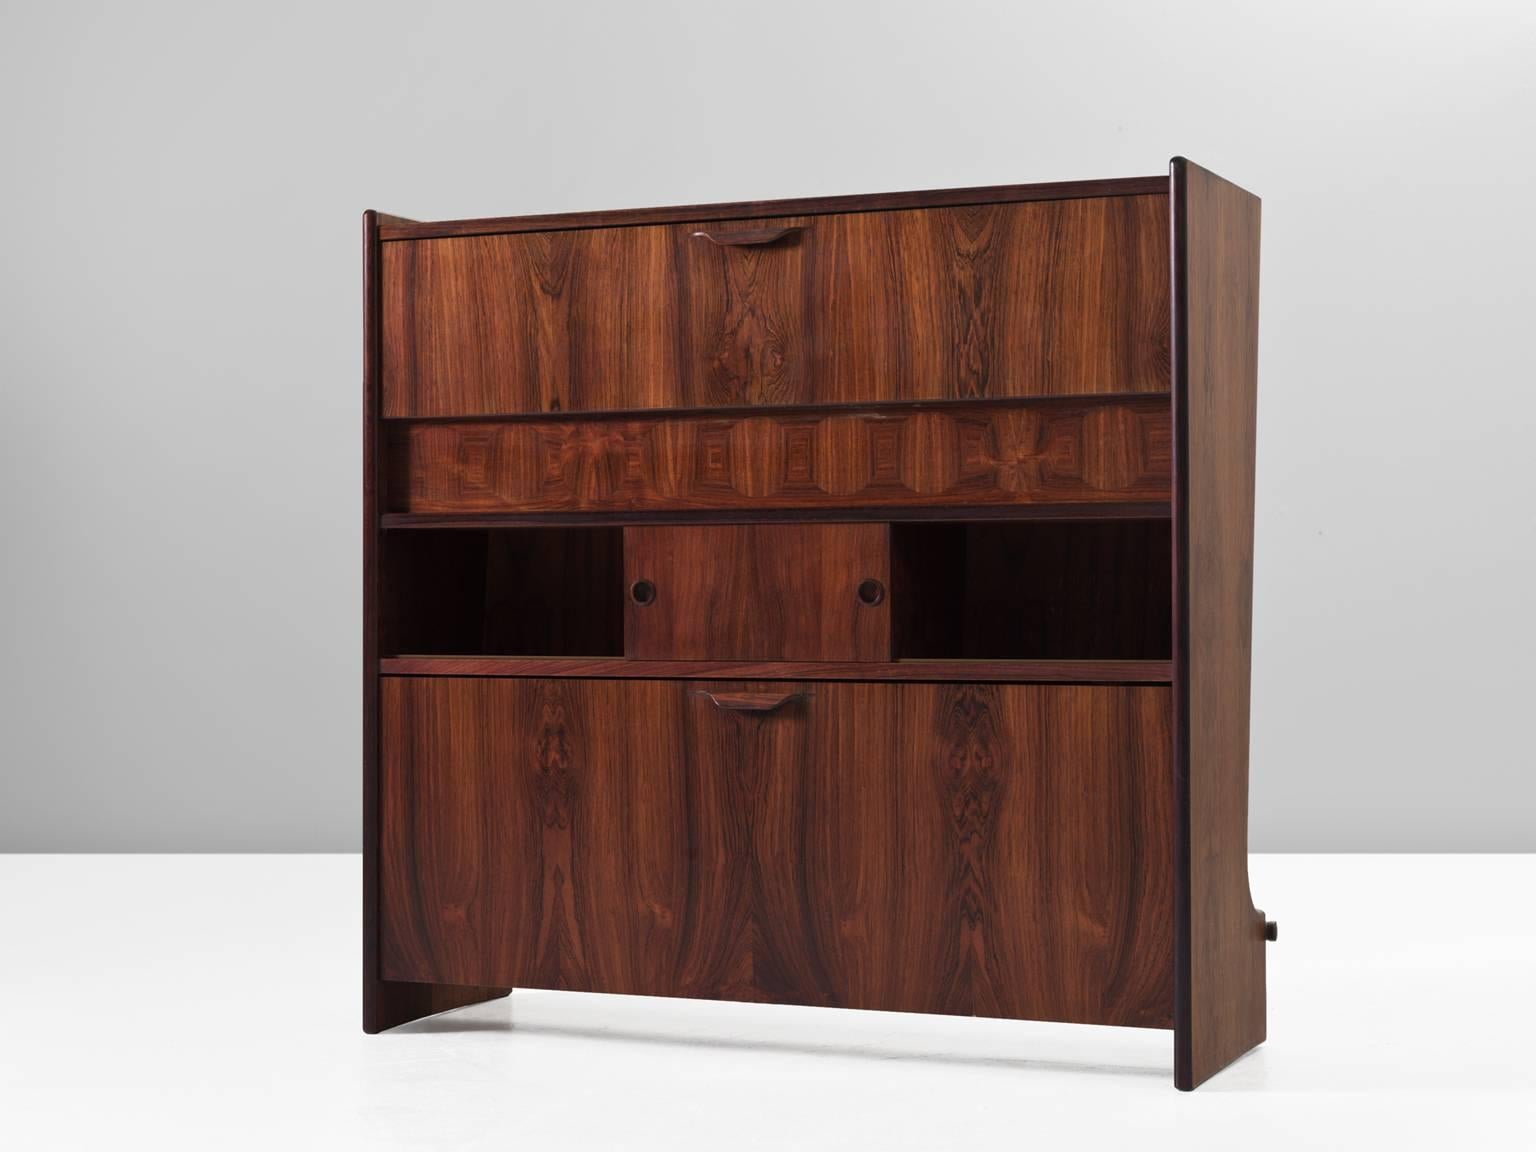 Johannes Andersen, bar in rosewood, glass and steel for Skaaning & Søn, model SK 661, 1960s. 

This wonderful little rosewood bar is designed by Johannes Andersen. The bar consists of two folding drawers and the interior has plenty of glass